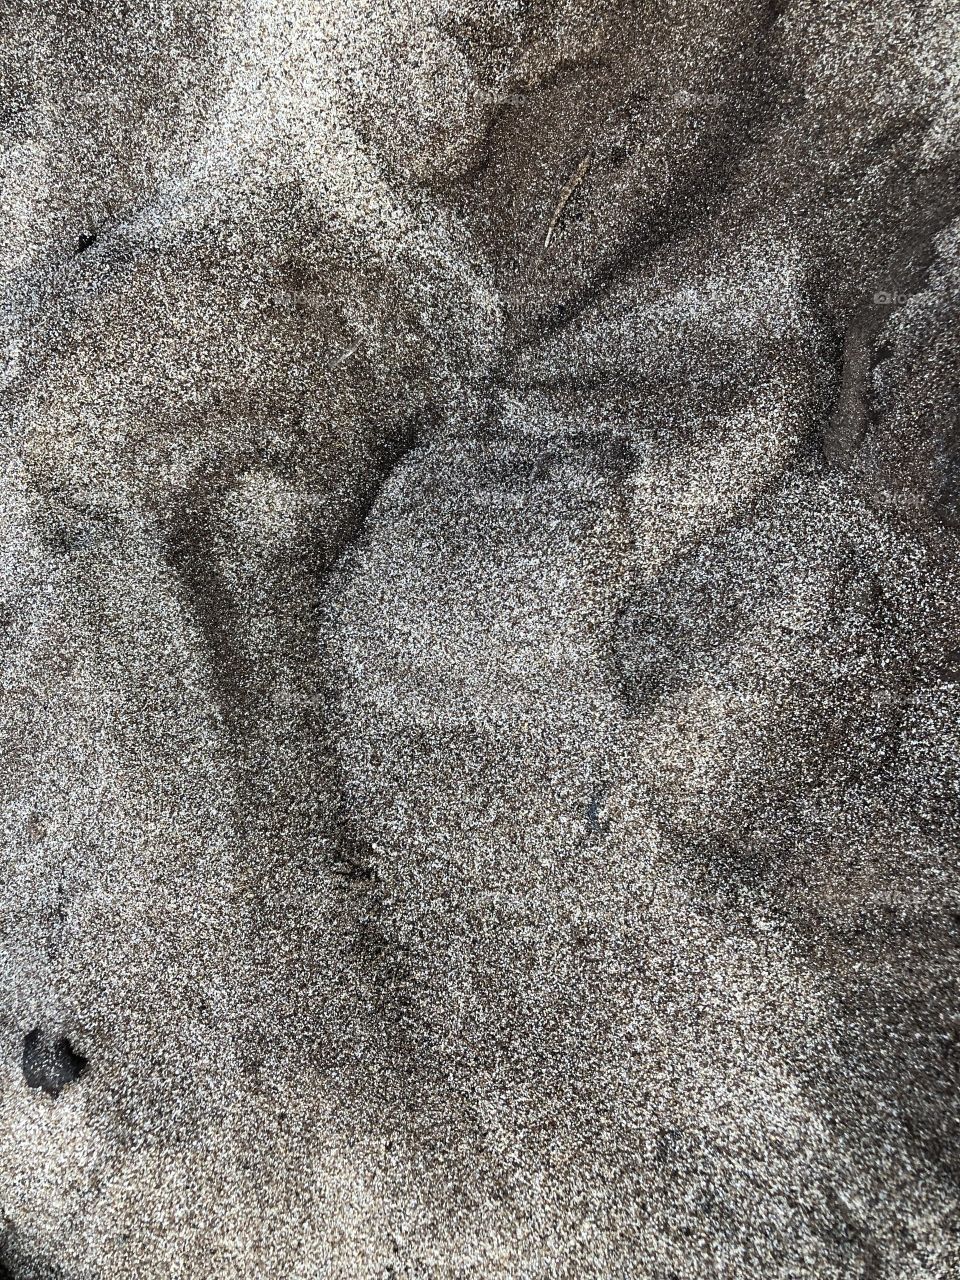 Sand mixed with dirt natural erosion 